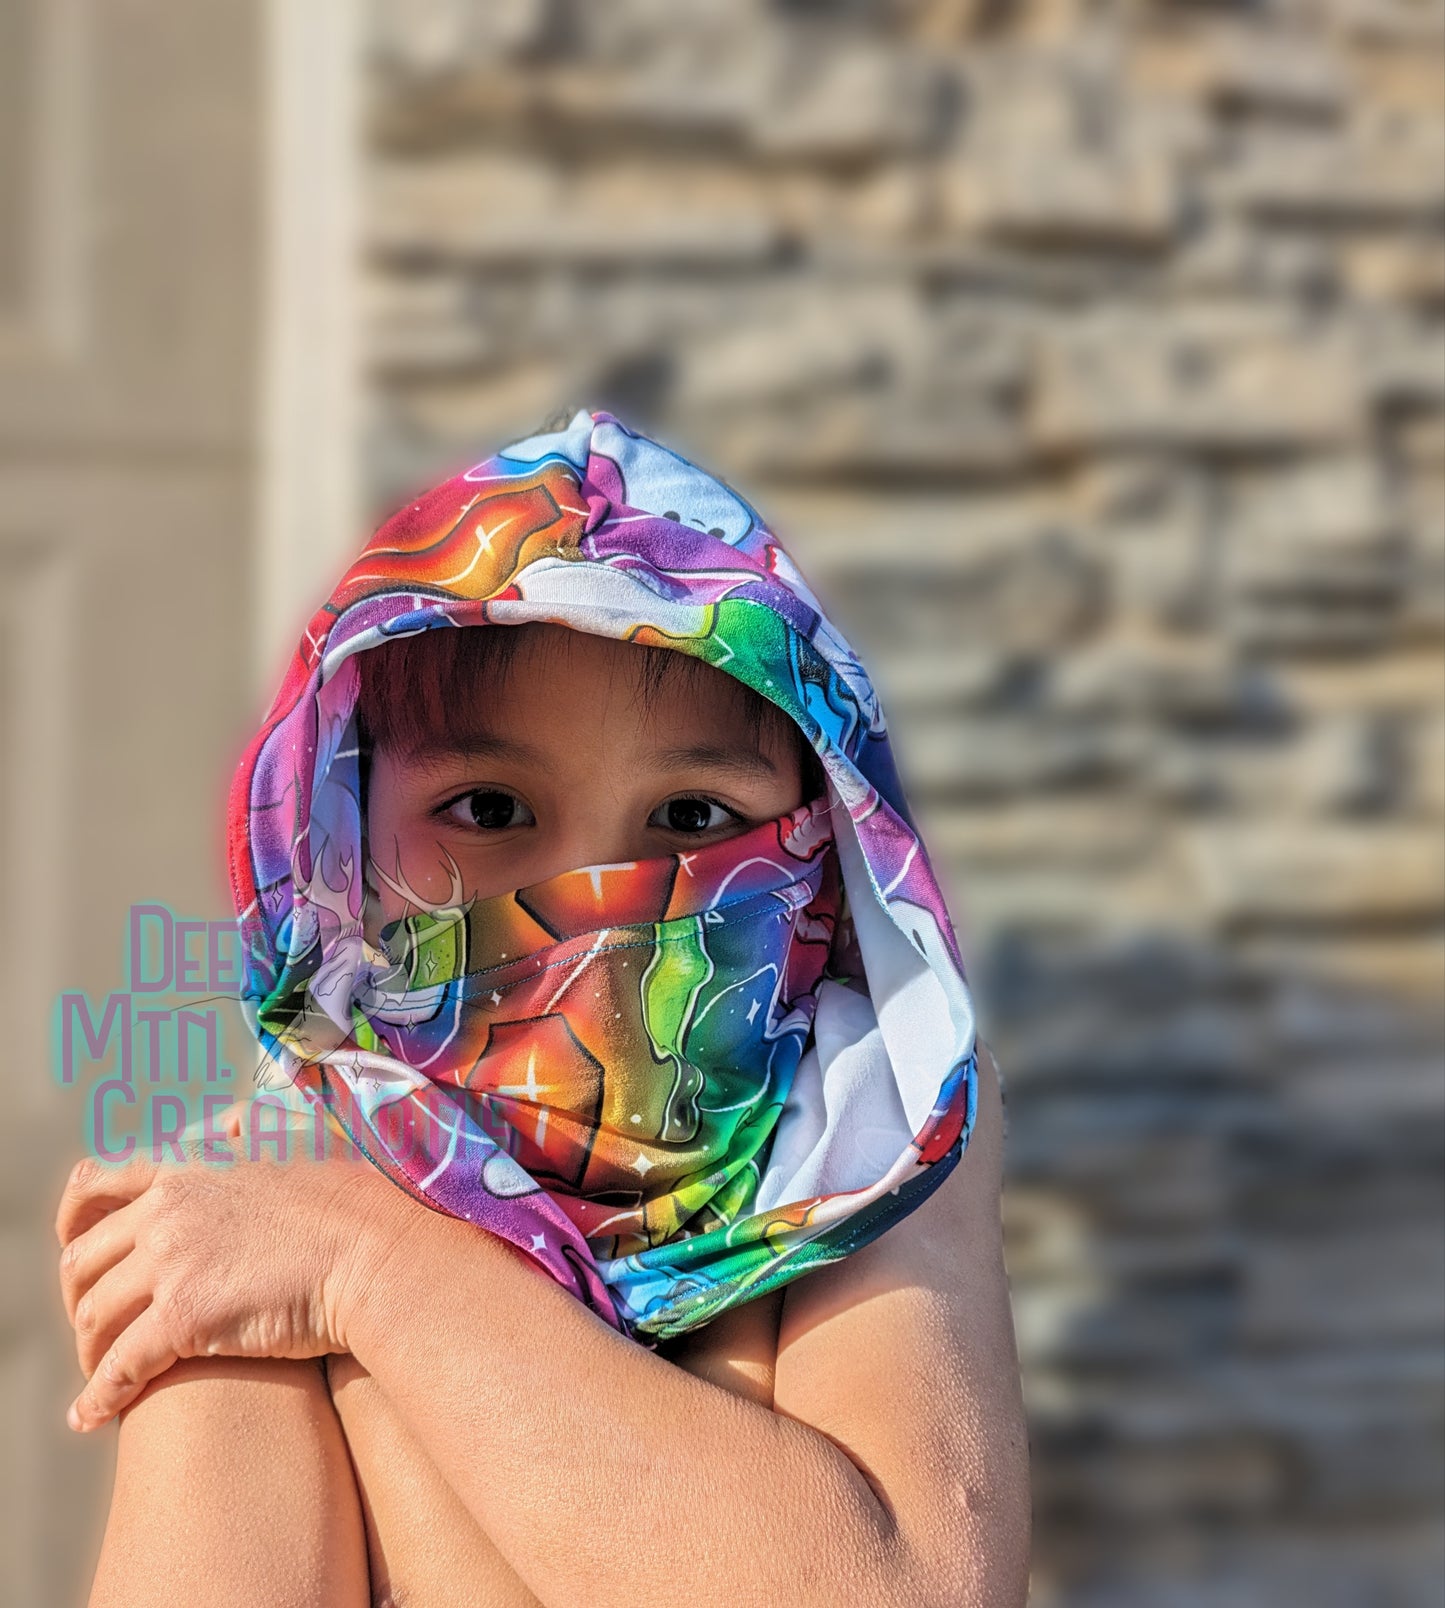 Scowl Cowl Sewing PDF pattern Hood and face covering by RockerByeDestash Patterns for kids and adults hoodie winter hat